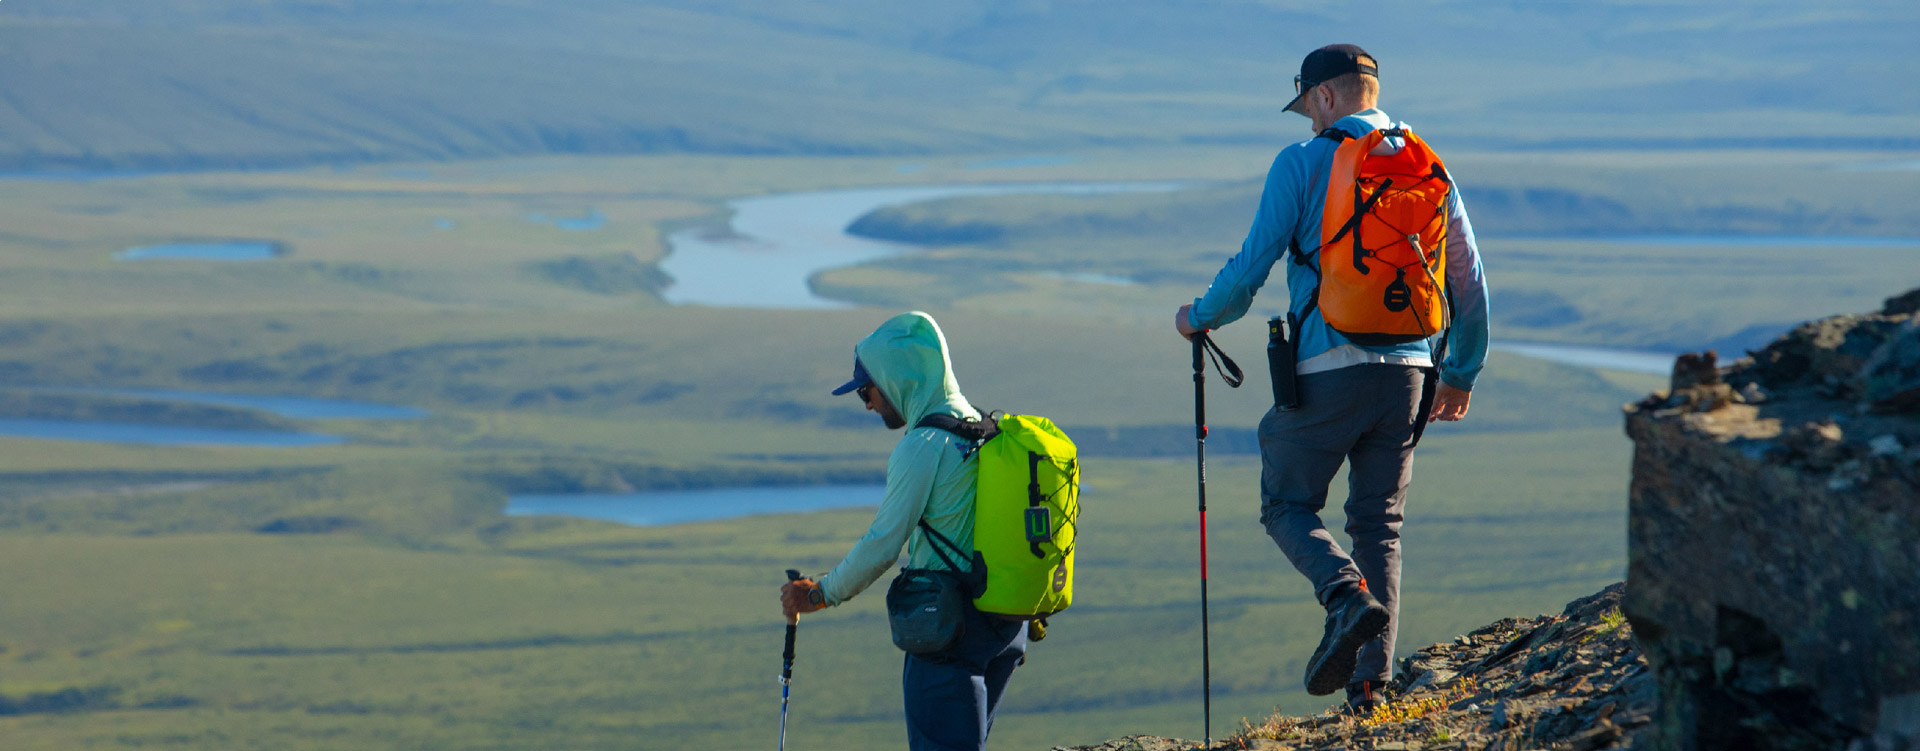 Hiking Must-Haves - Gear to help cover more miles.